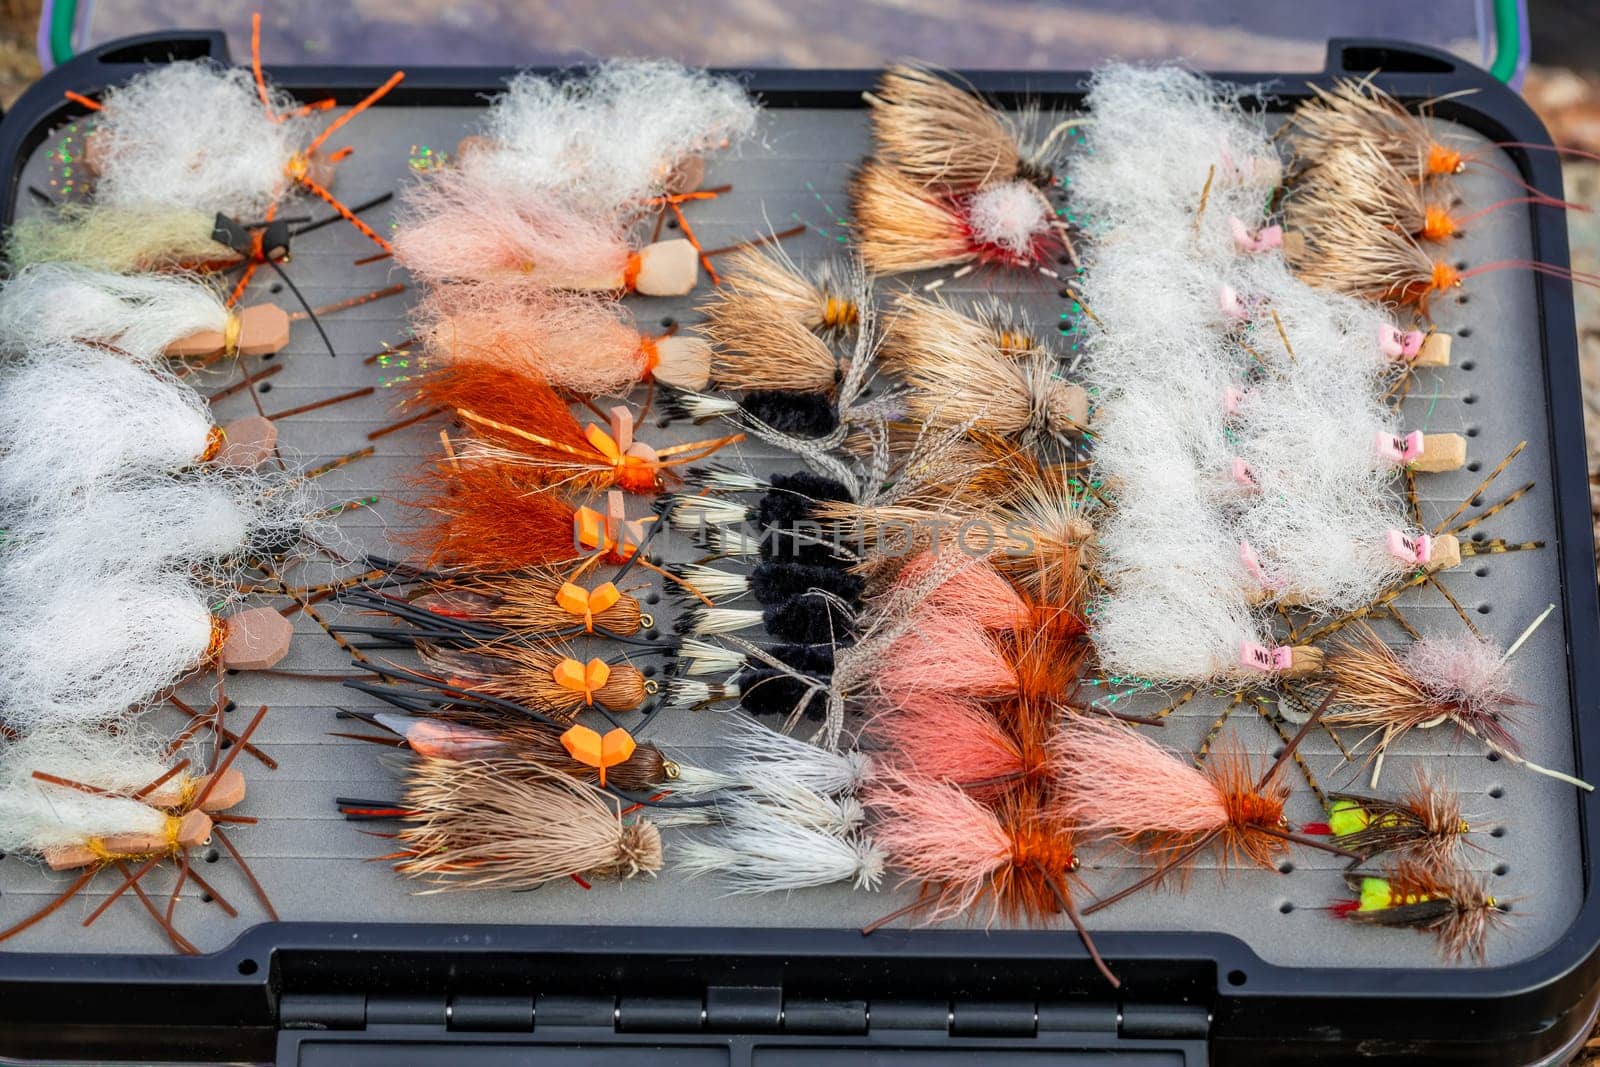 Fly box closeup detail of some flies and nymphs ready for trout fishing in the Fall in Oregon.